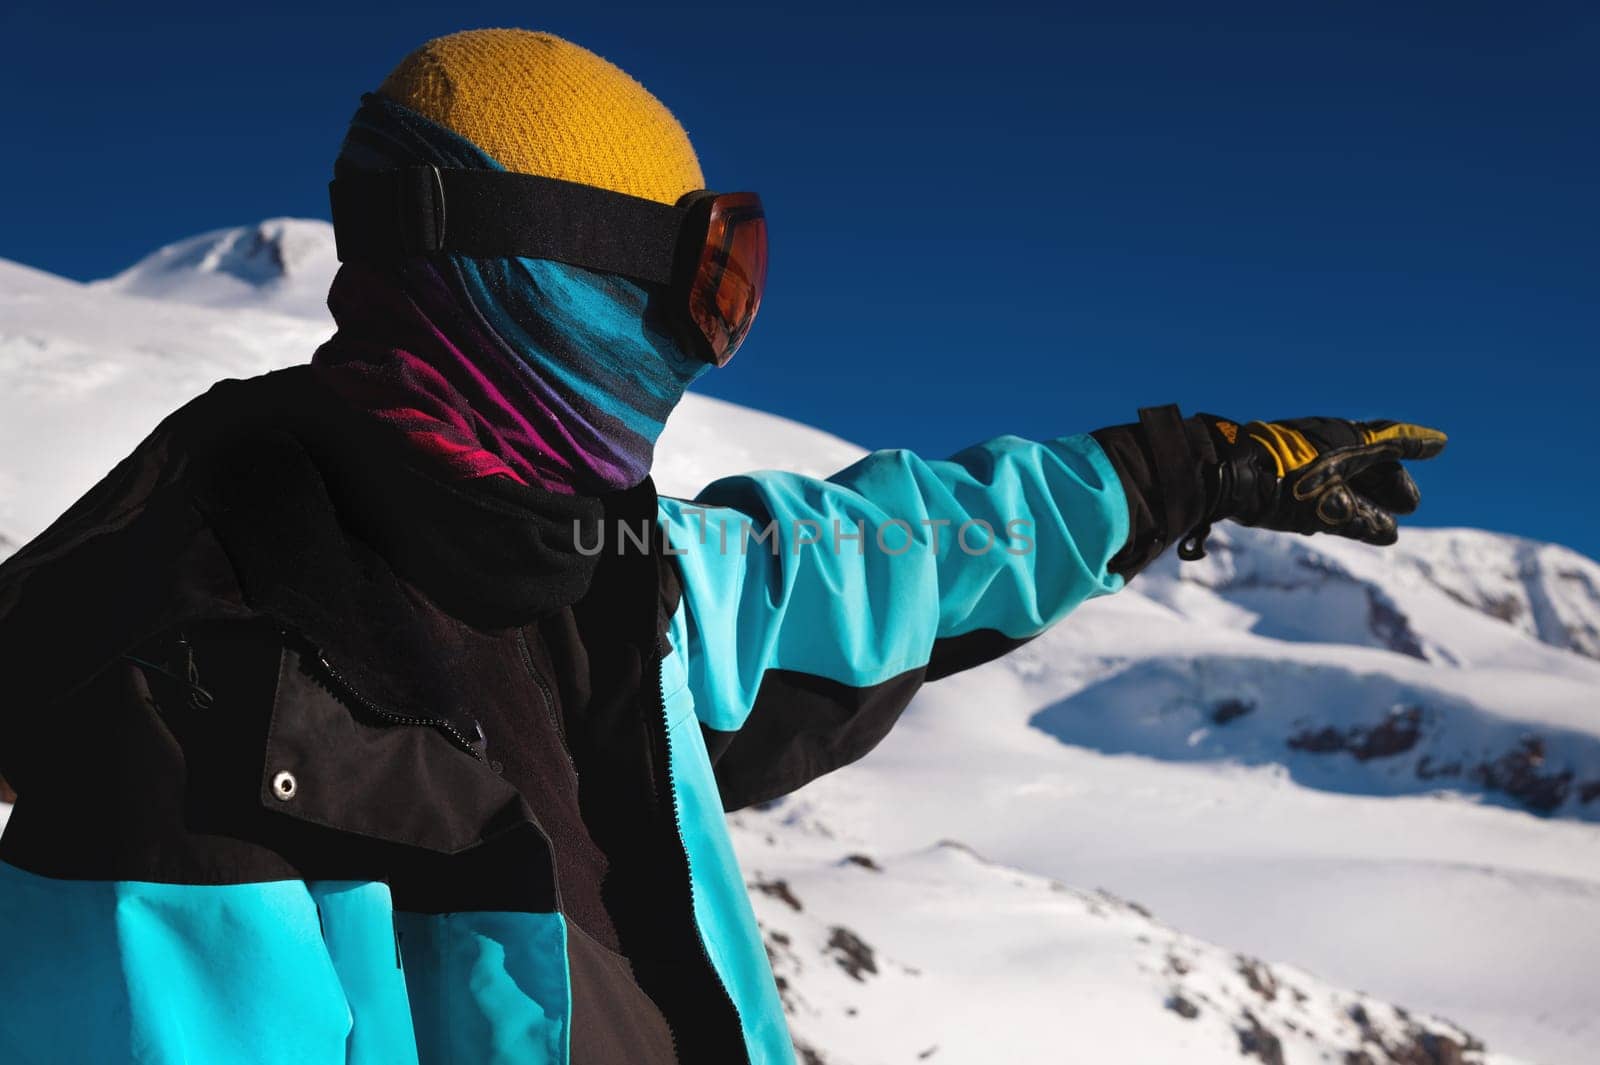 Sportsman pointing with his hand while skiing on a snowy slope. A traveler, a tourist, pointing his hand somewhere in the direction of the mountains. Winter sports activity.